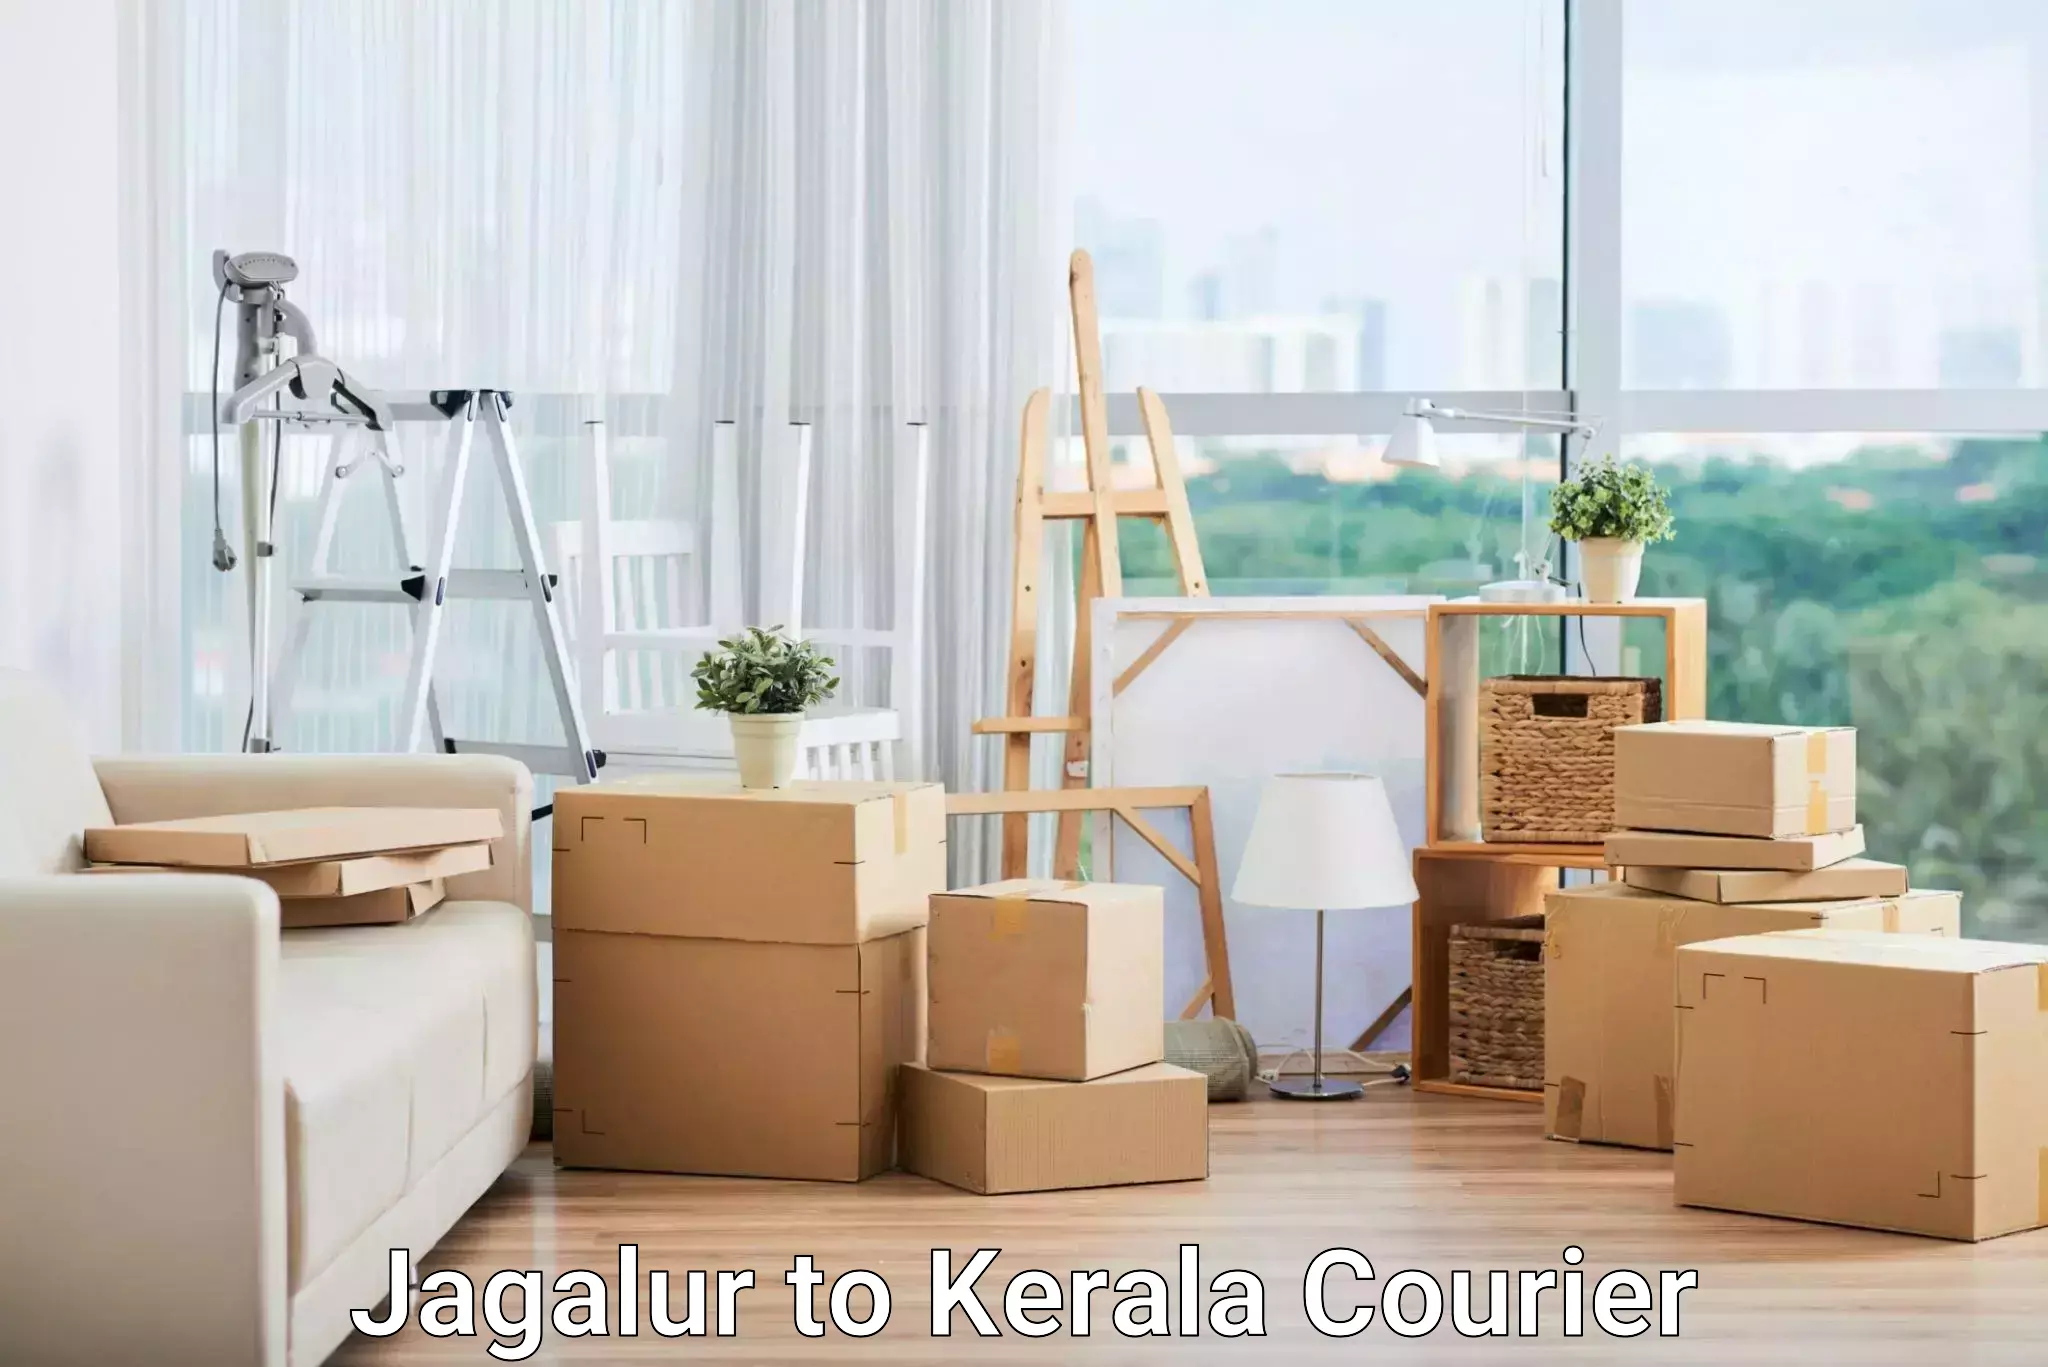 Flexible delivery schedules Jagalur to Cochin Port Kochi